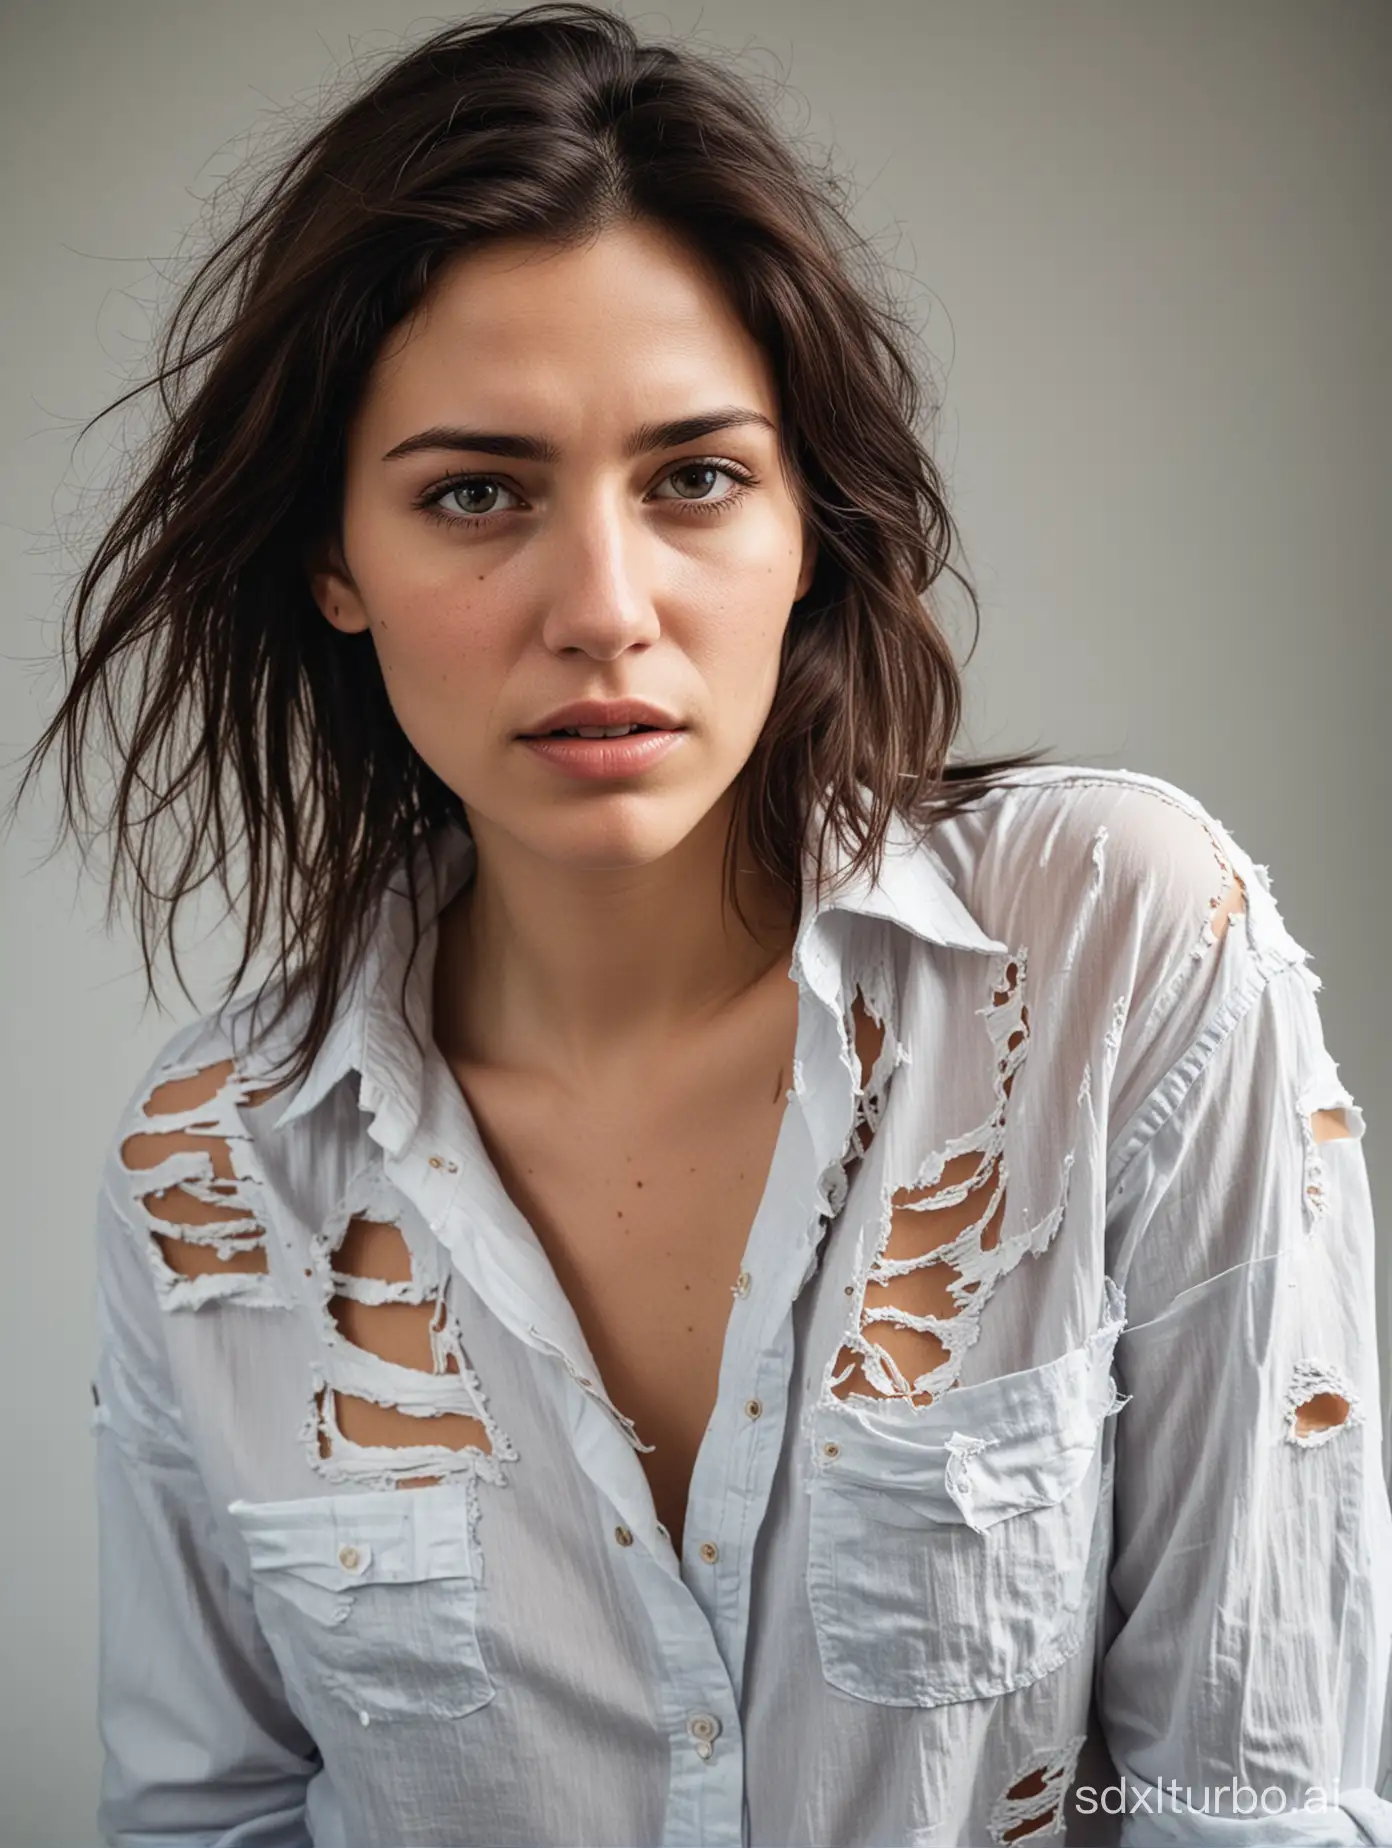 Dramatic-Portrait-of-a-Woman-in-Torn-Ripped-Shirt